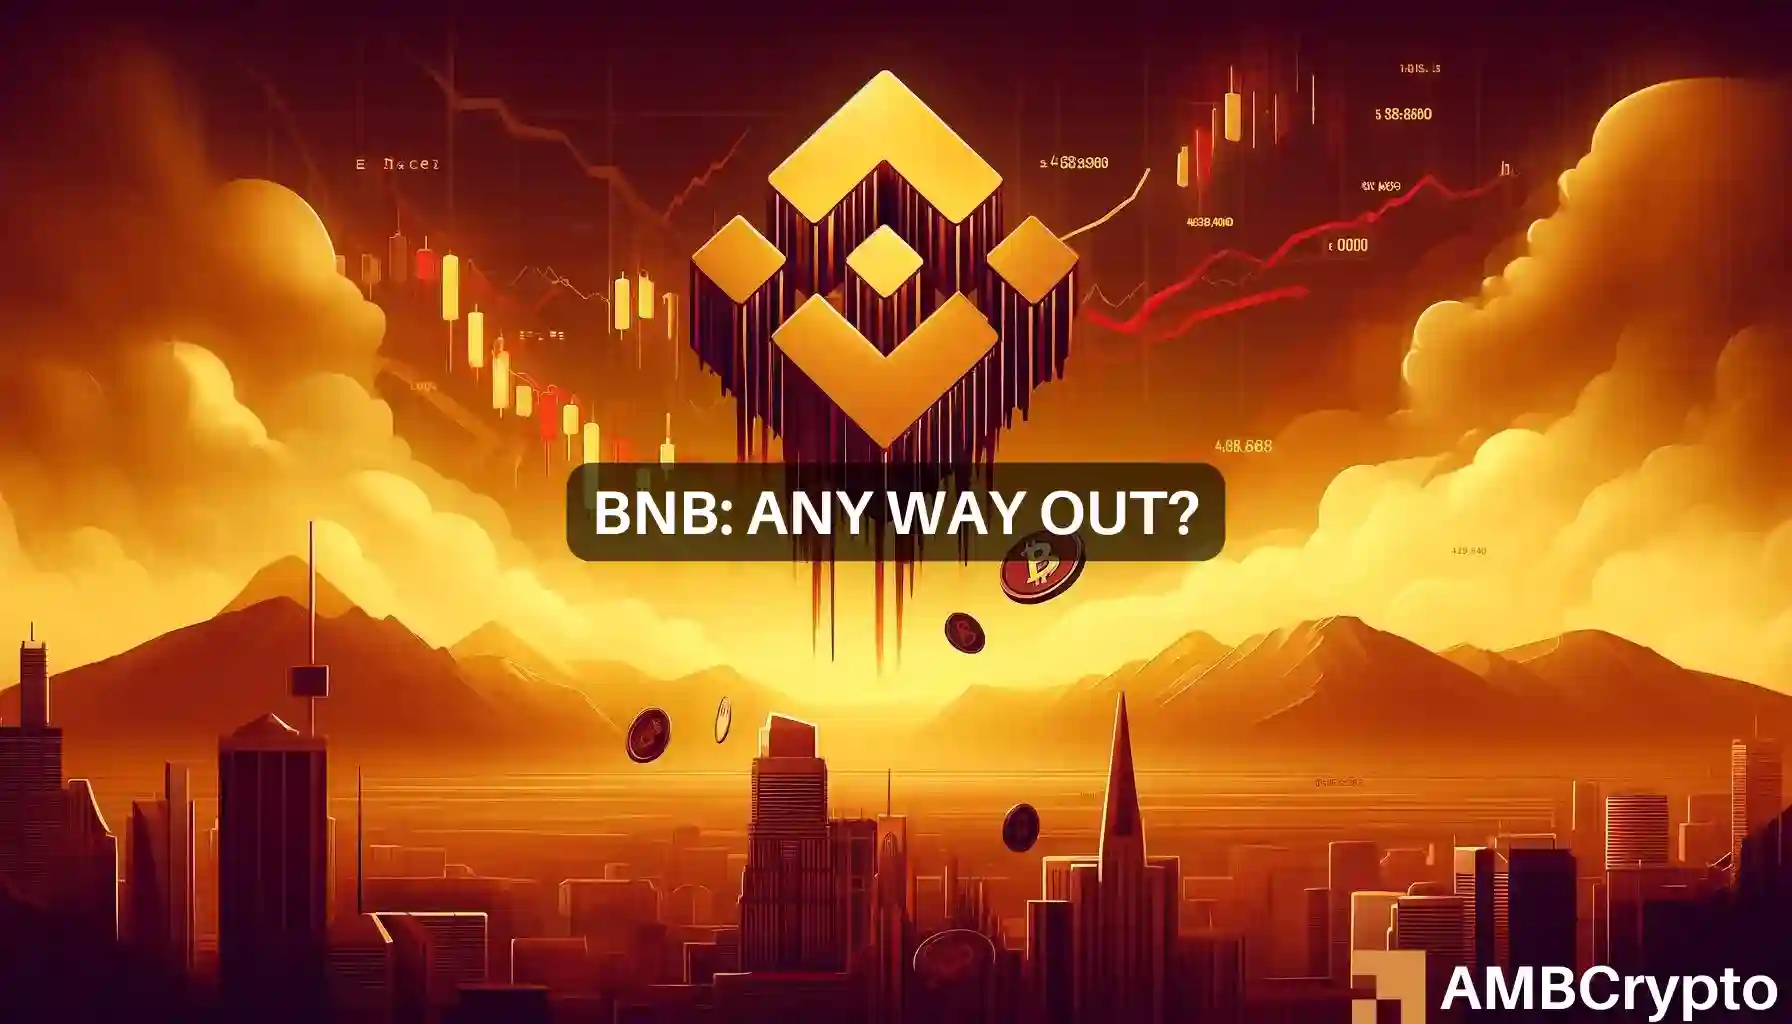 BNB Chain's revenue takes a hit: Examining the root cause